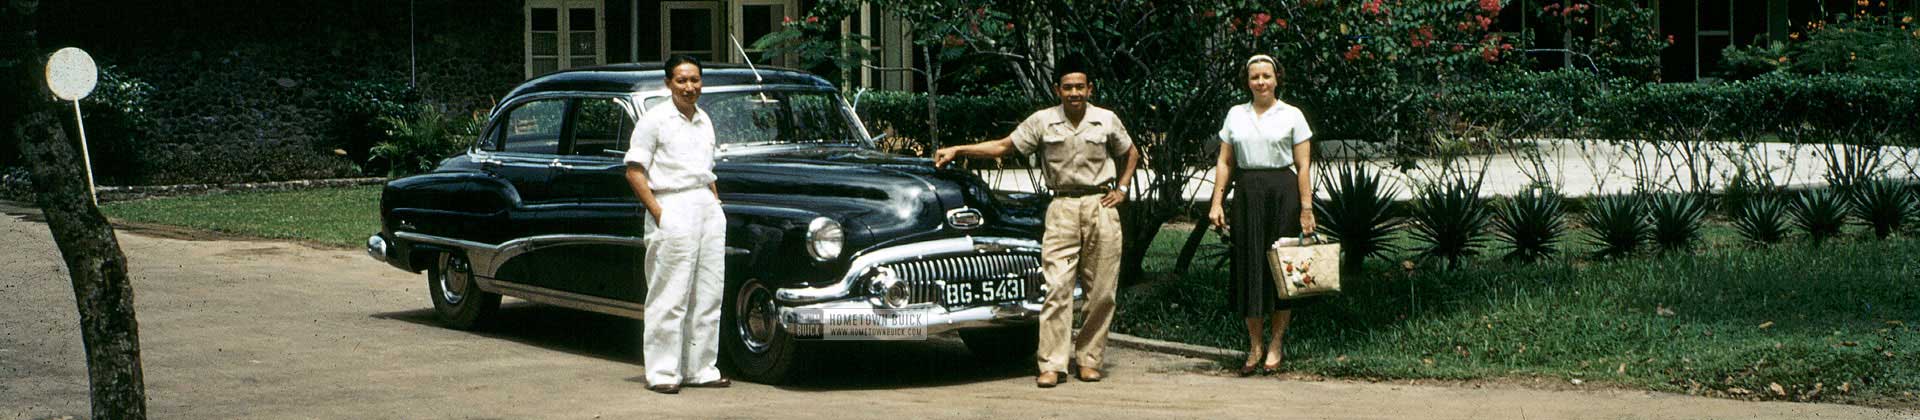 1951 Buick Banner